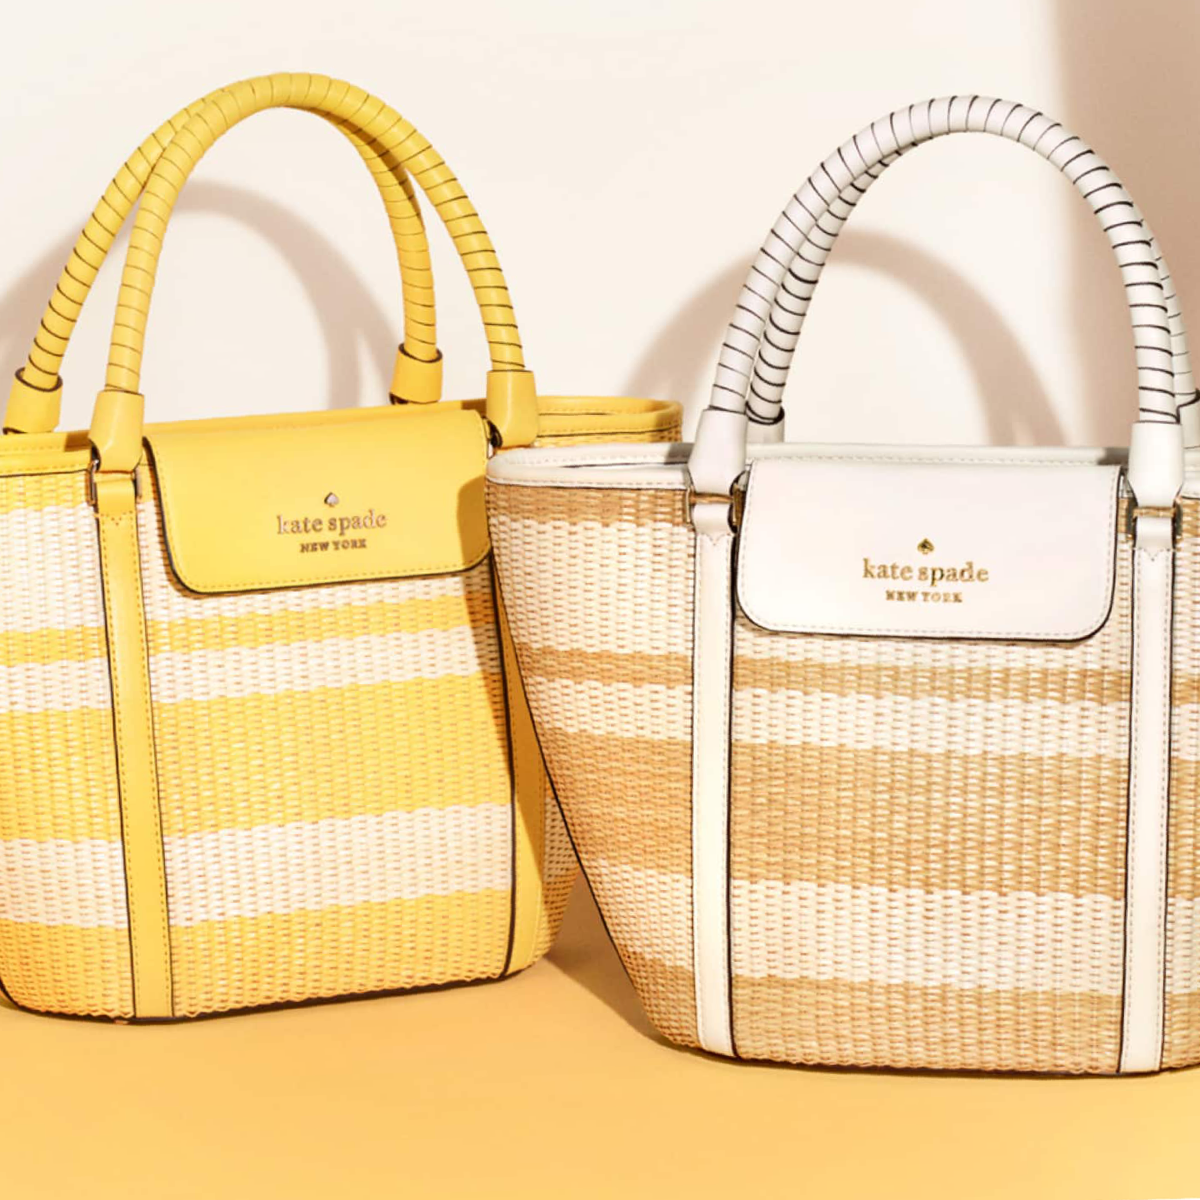 Kate Spade's Suprise Sale: Handbags for Up to 73% Off